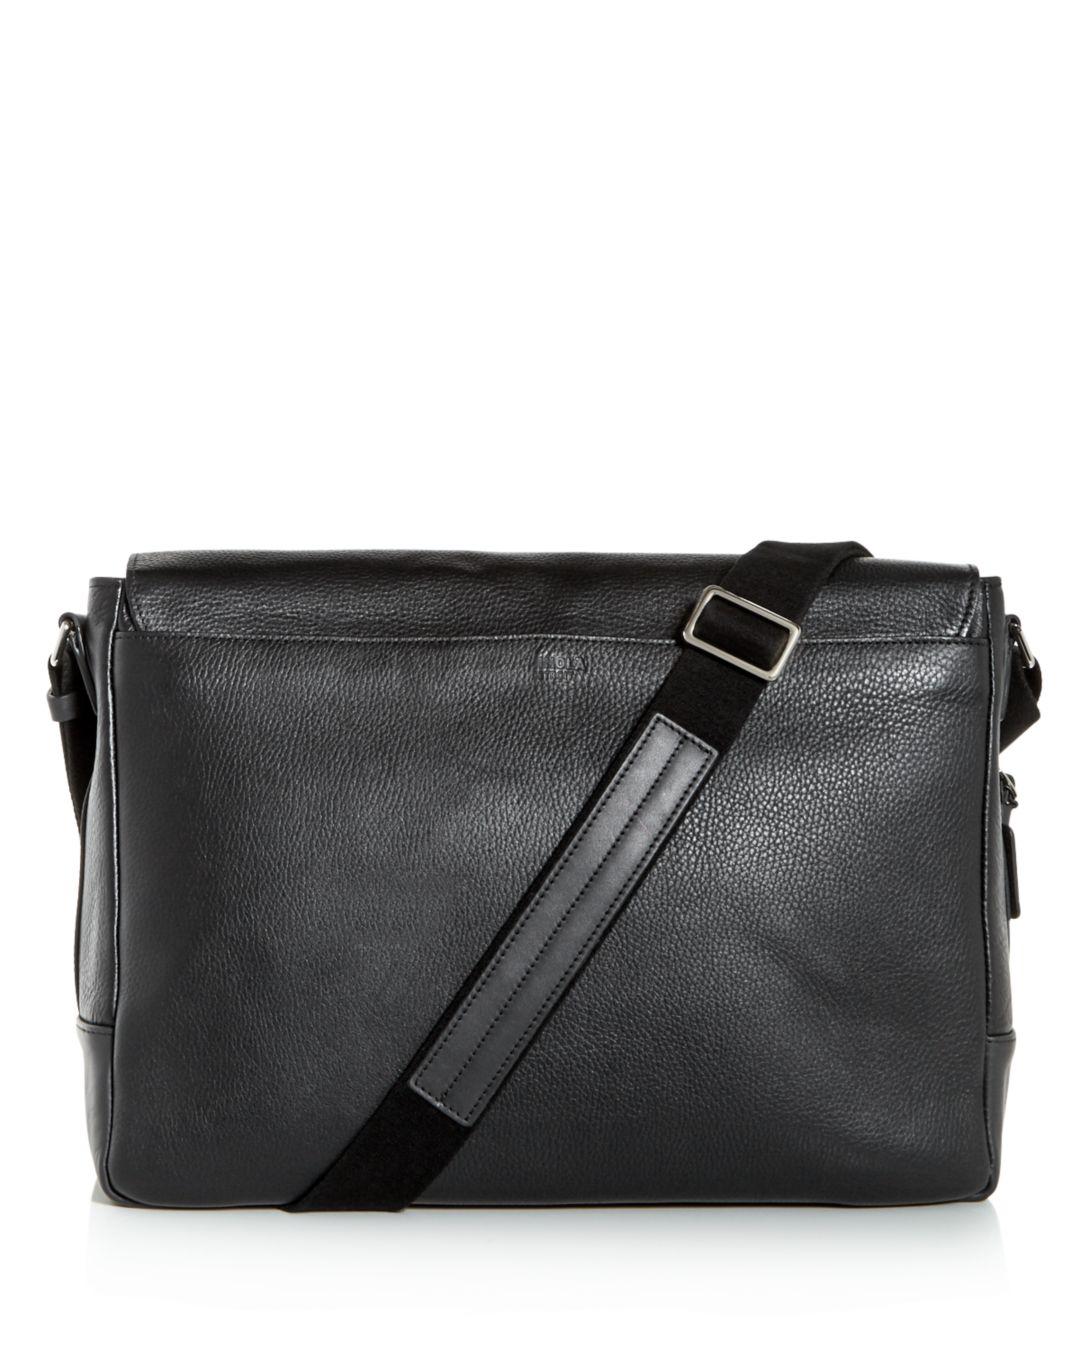 Shinola Canfield Leather Messenger Bag in Black for Men - Lyst